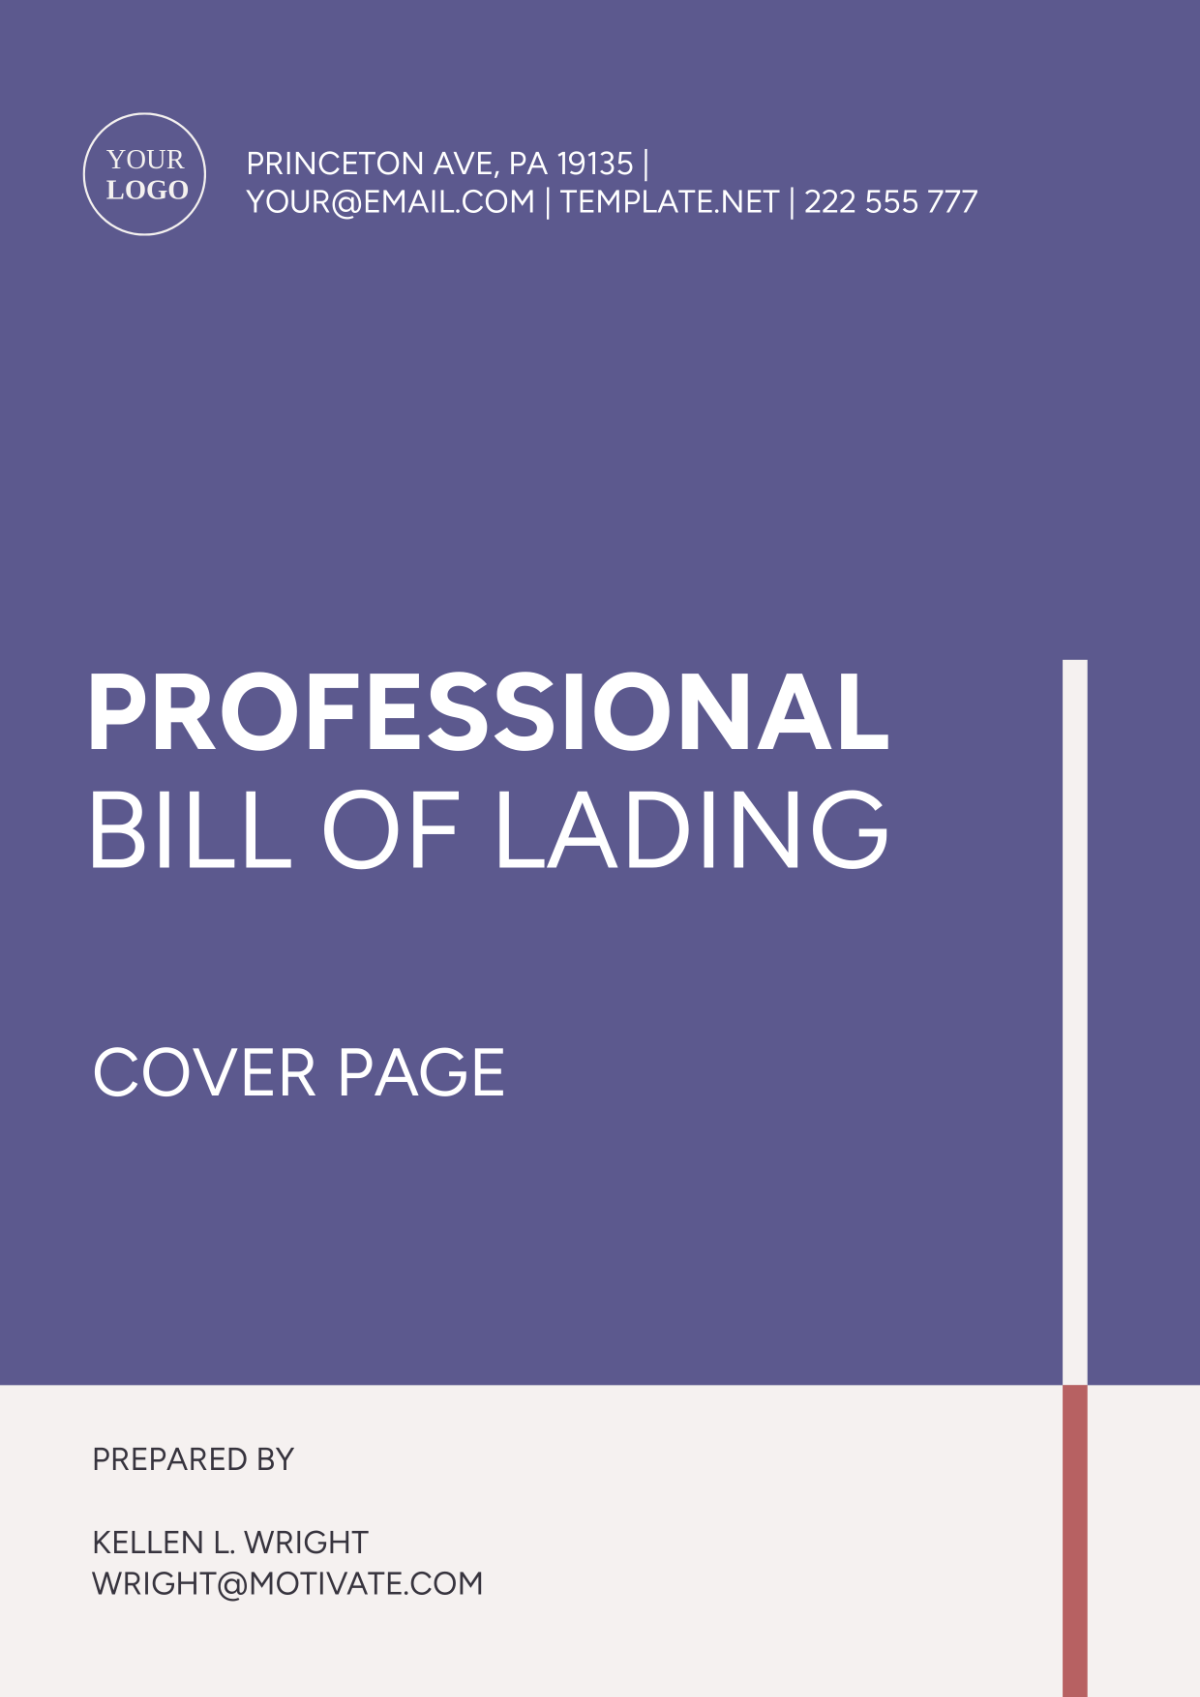 Professional Bill of Lading Cover Page